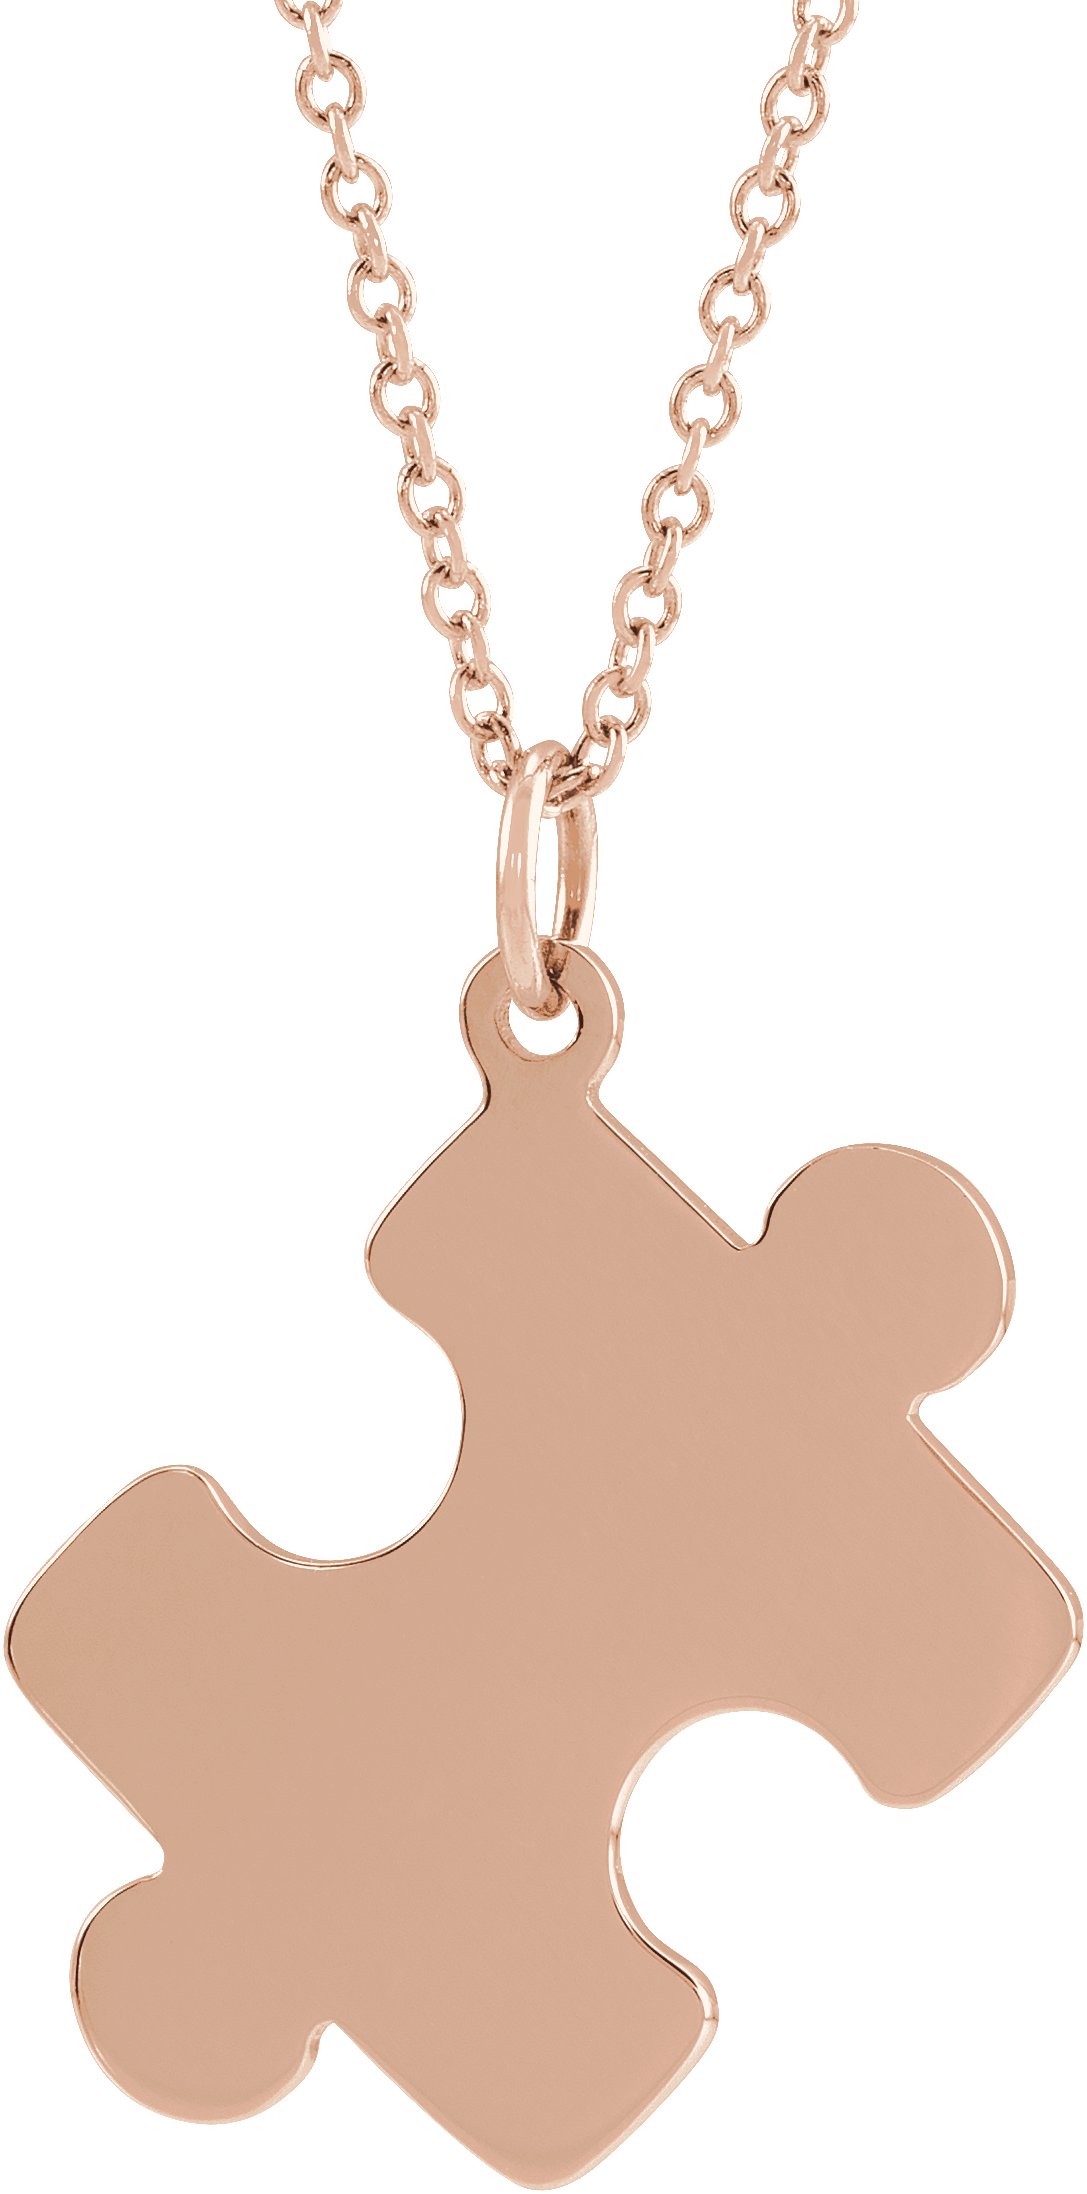 18K Rose Gold-Plated Sterling Silver Engravable Puzzle Piece 16-18" Necklace